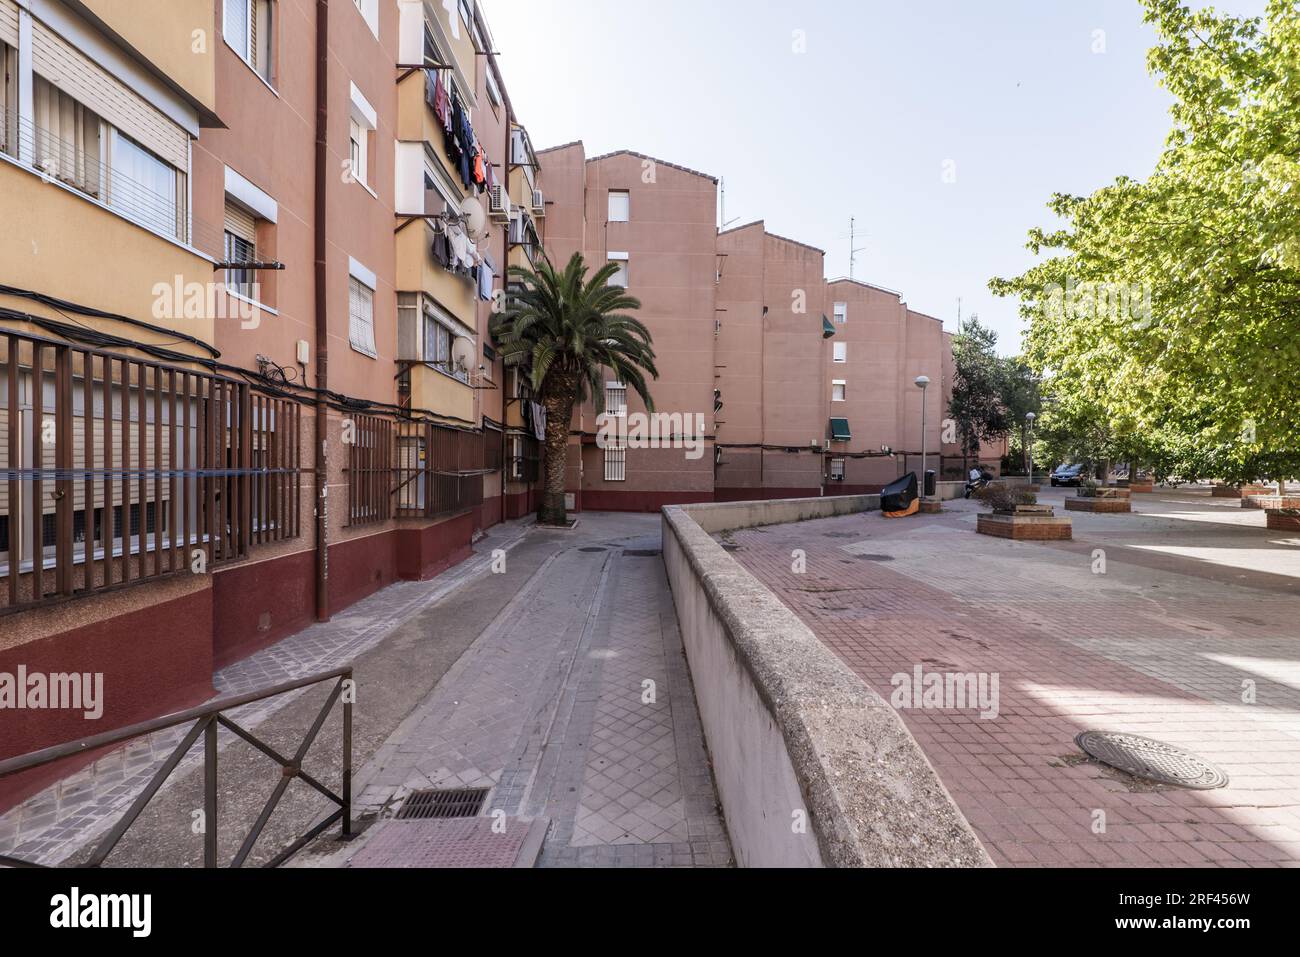 Access area and promenade of a modest and old urban housing development Stock Photo